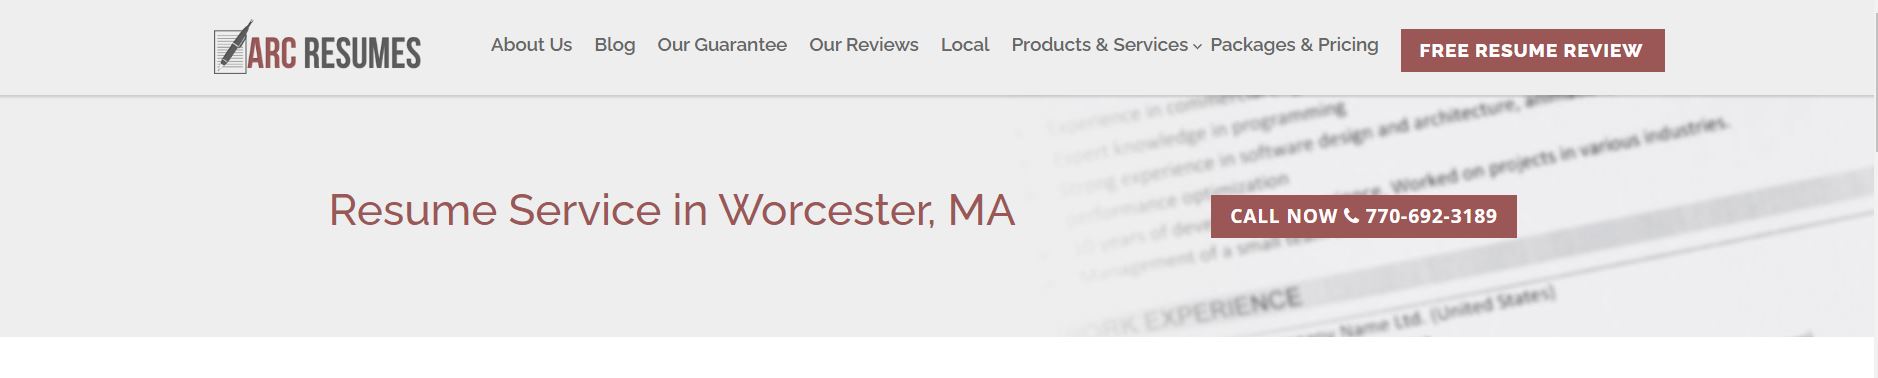 ARC best resume writing services in worcester
